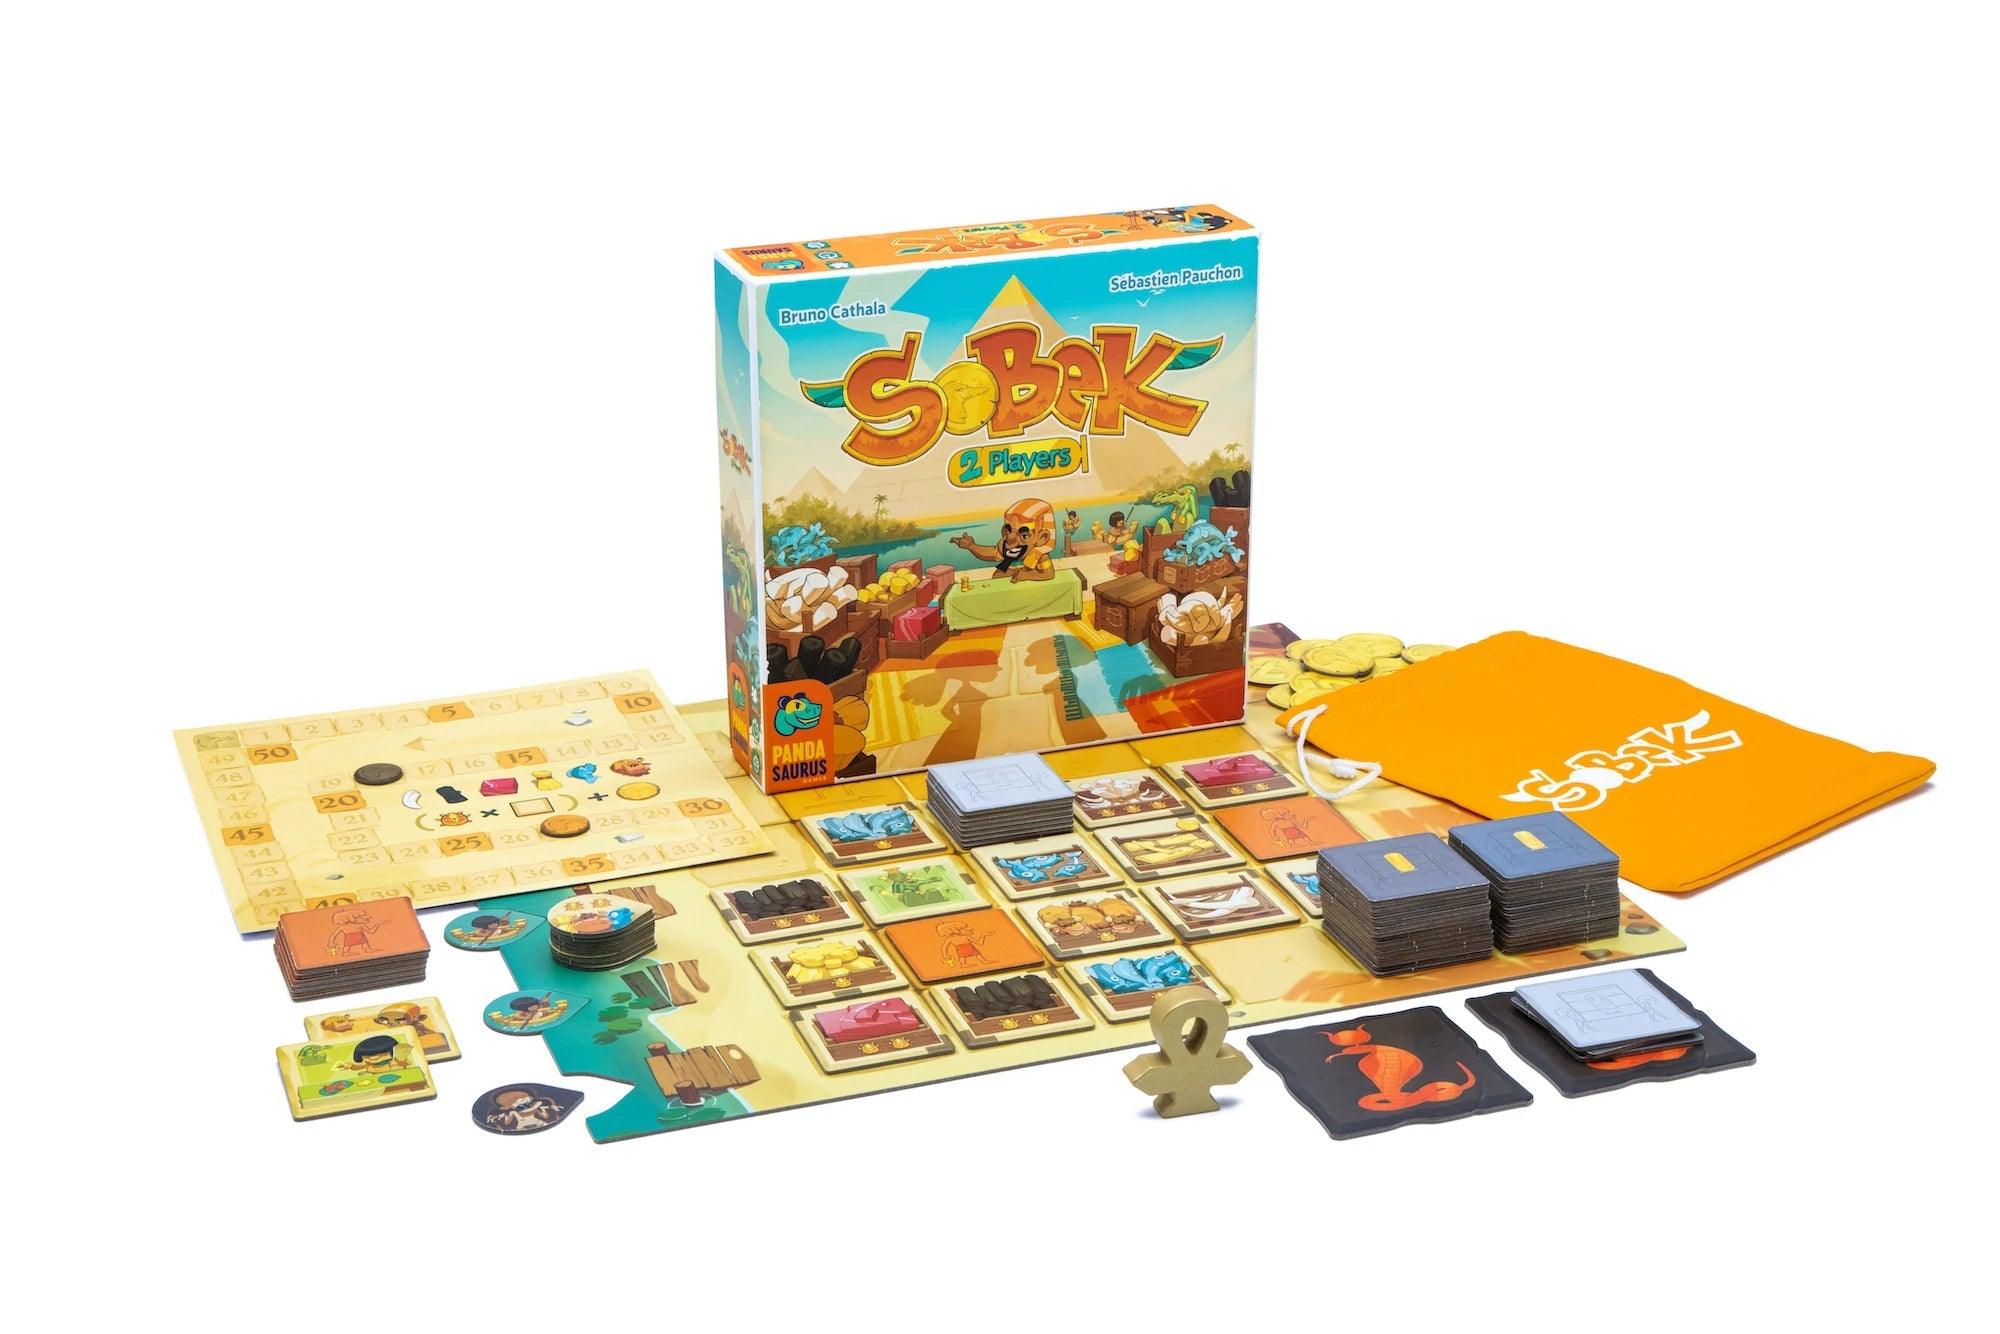 Sobek: 2 Players - Gaming Library